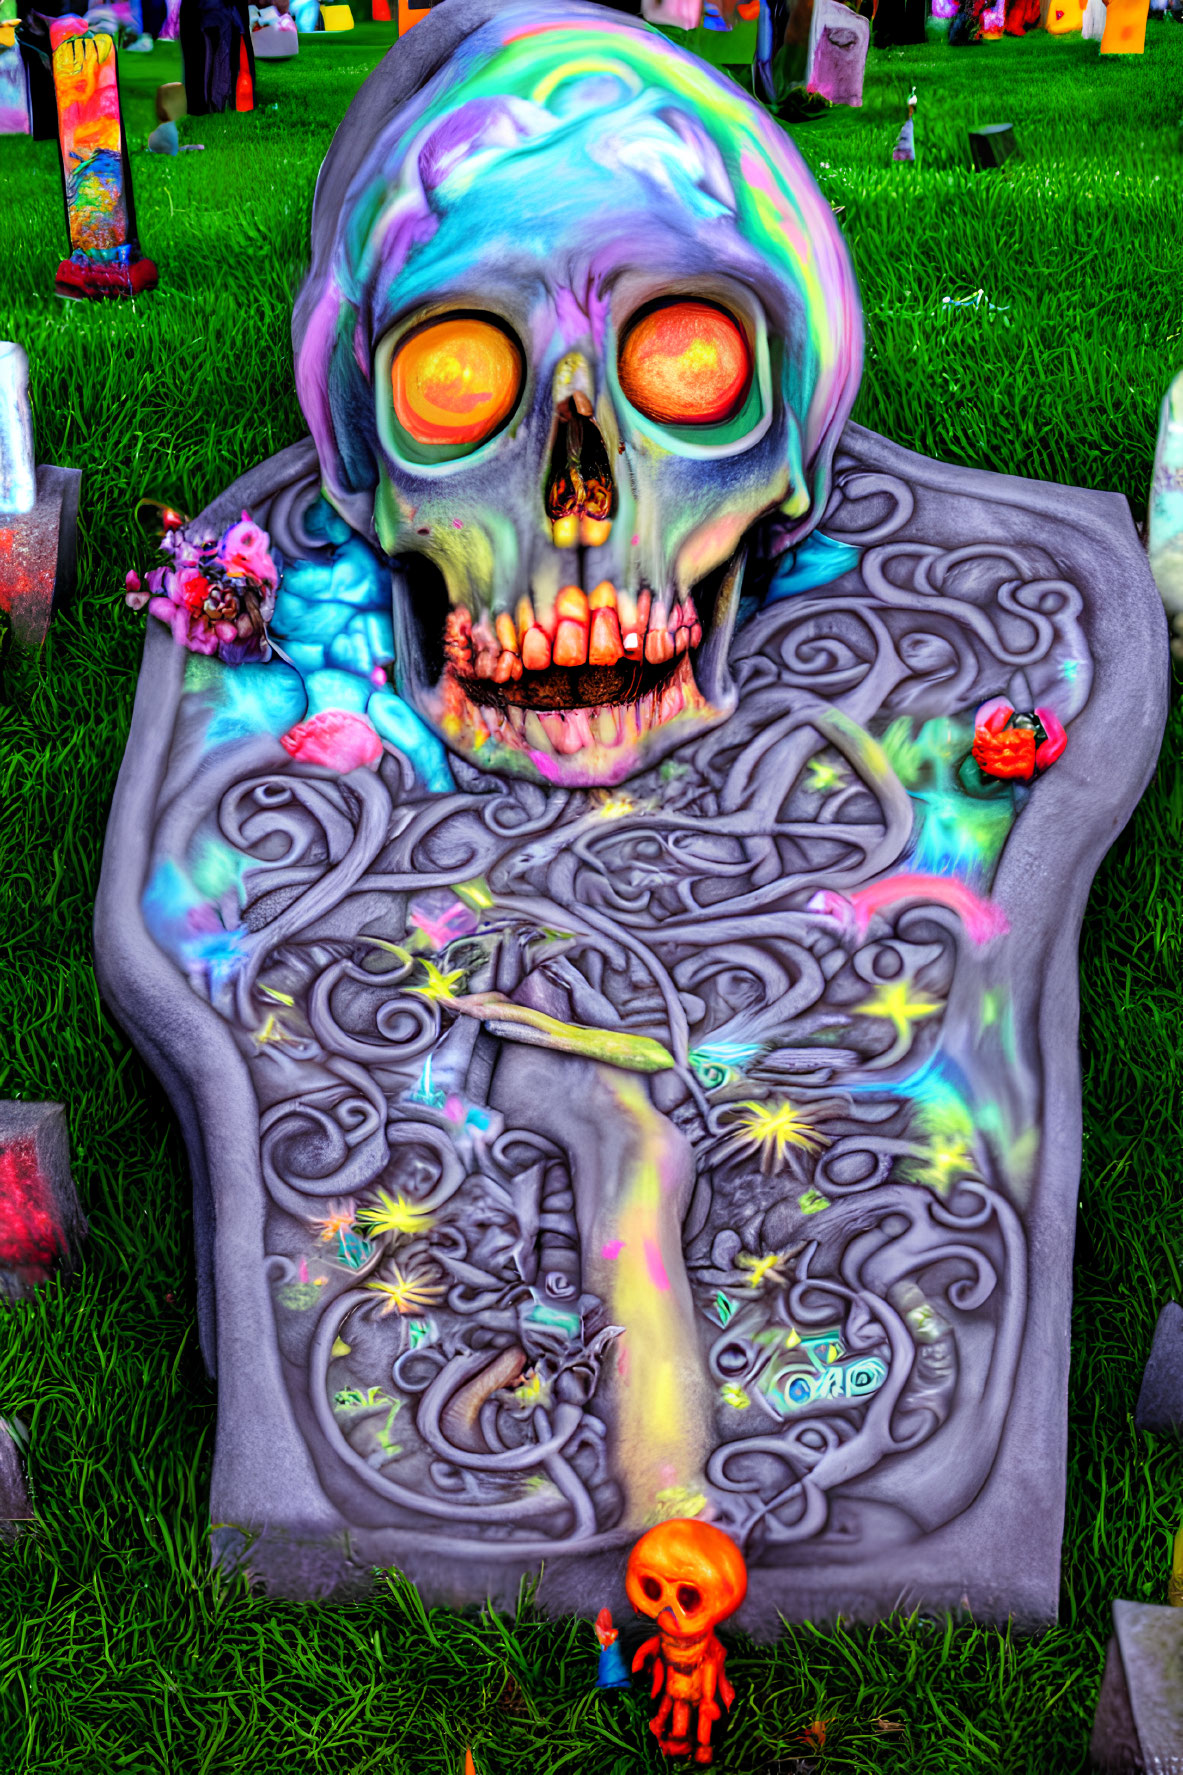 Colorful Skull Painting with Glowing Eyes on Tombstone Amid Grave Decorations